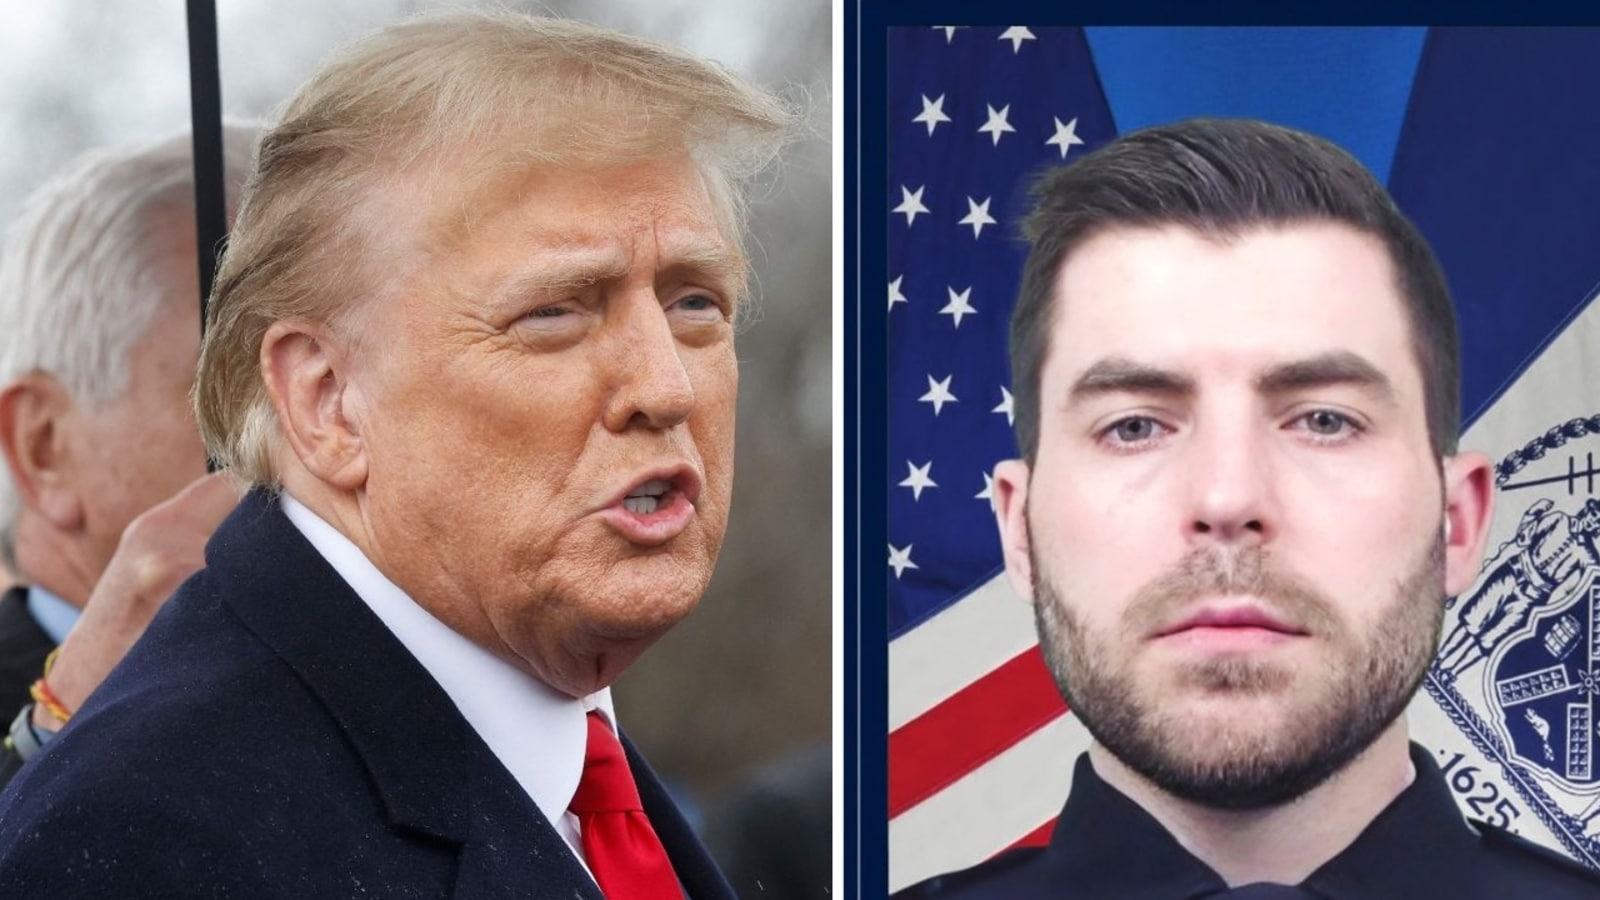 Jonathan Diller death: Donald Trump visits family of slain NYPD detective, ‘beautifully’ prays with them